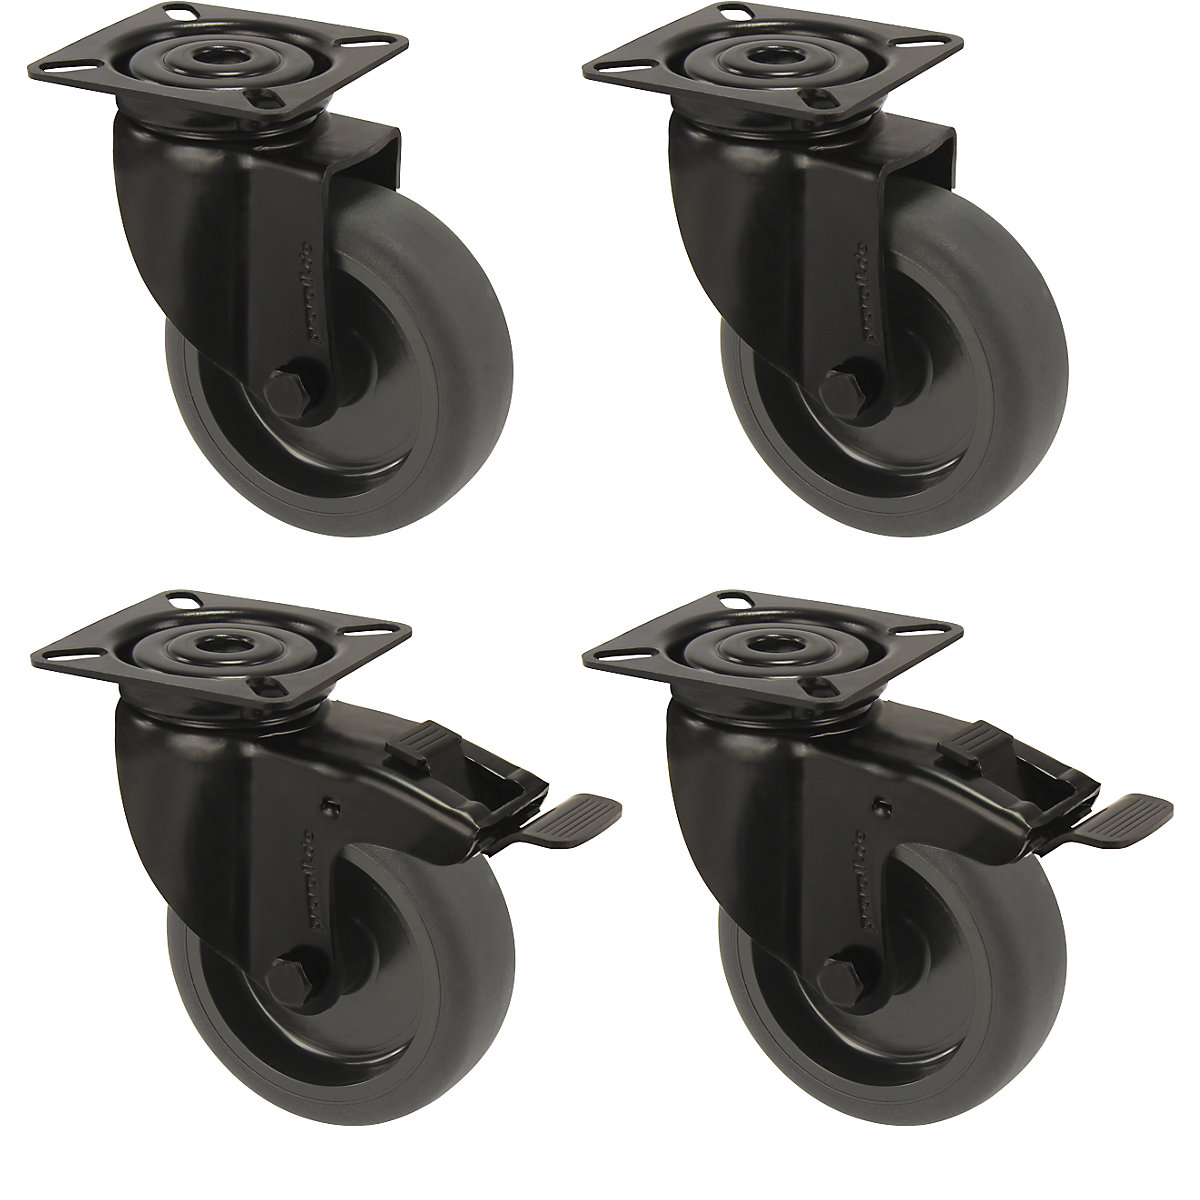 Black rubber tyre, thermoplastic, with mounting plate, offered as a set – Proroll, 2 swivel castors with double stops and 2 swivel castors, wheel Ø x width 75 x 23 mm-3